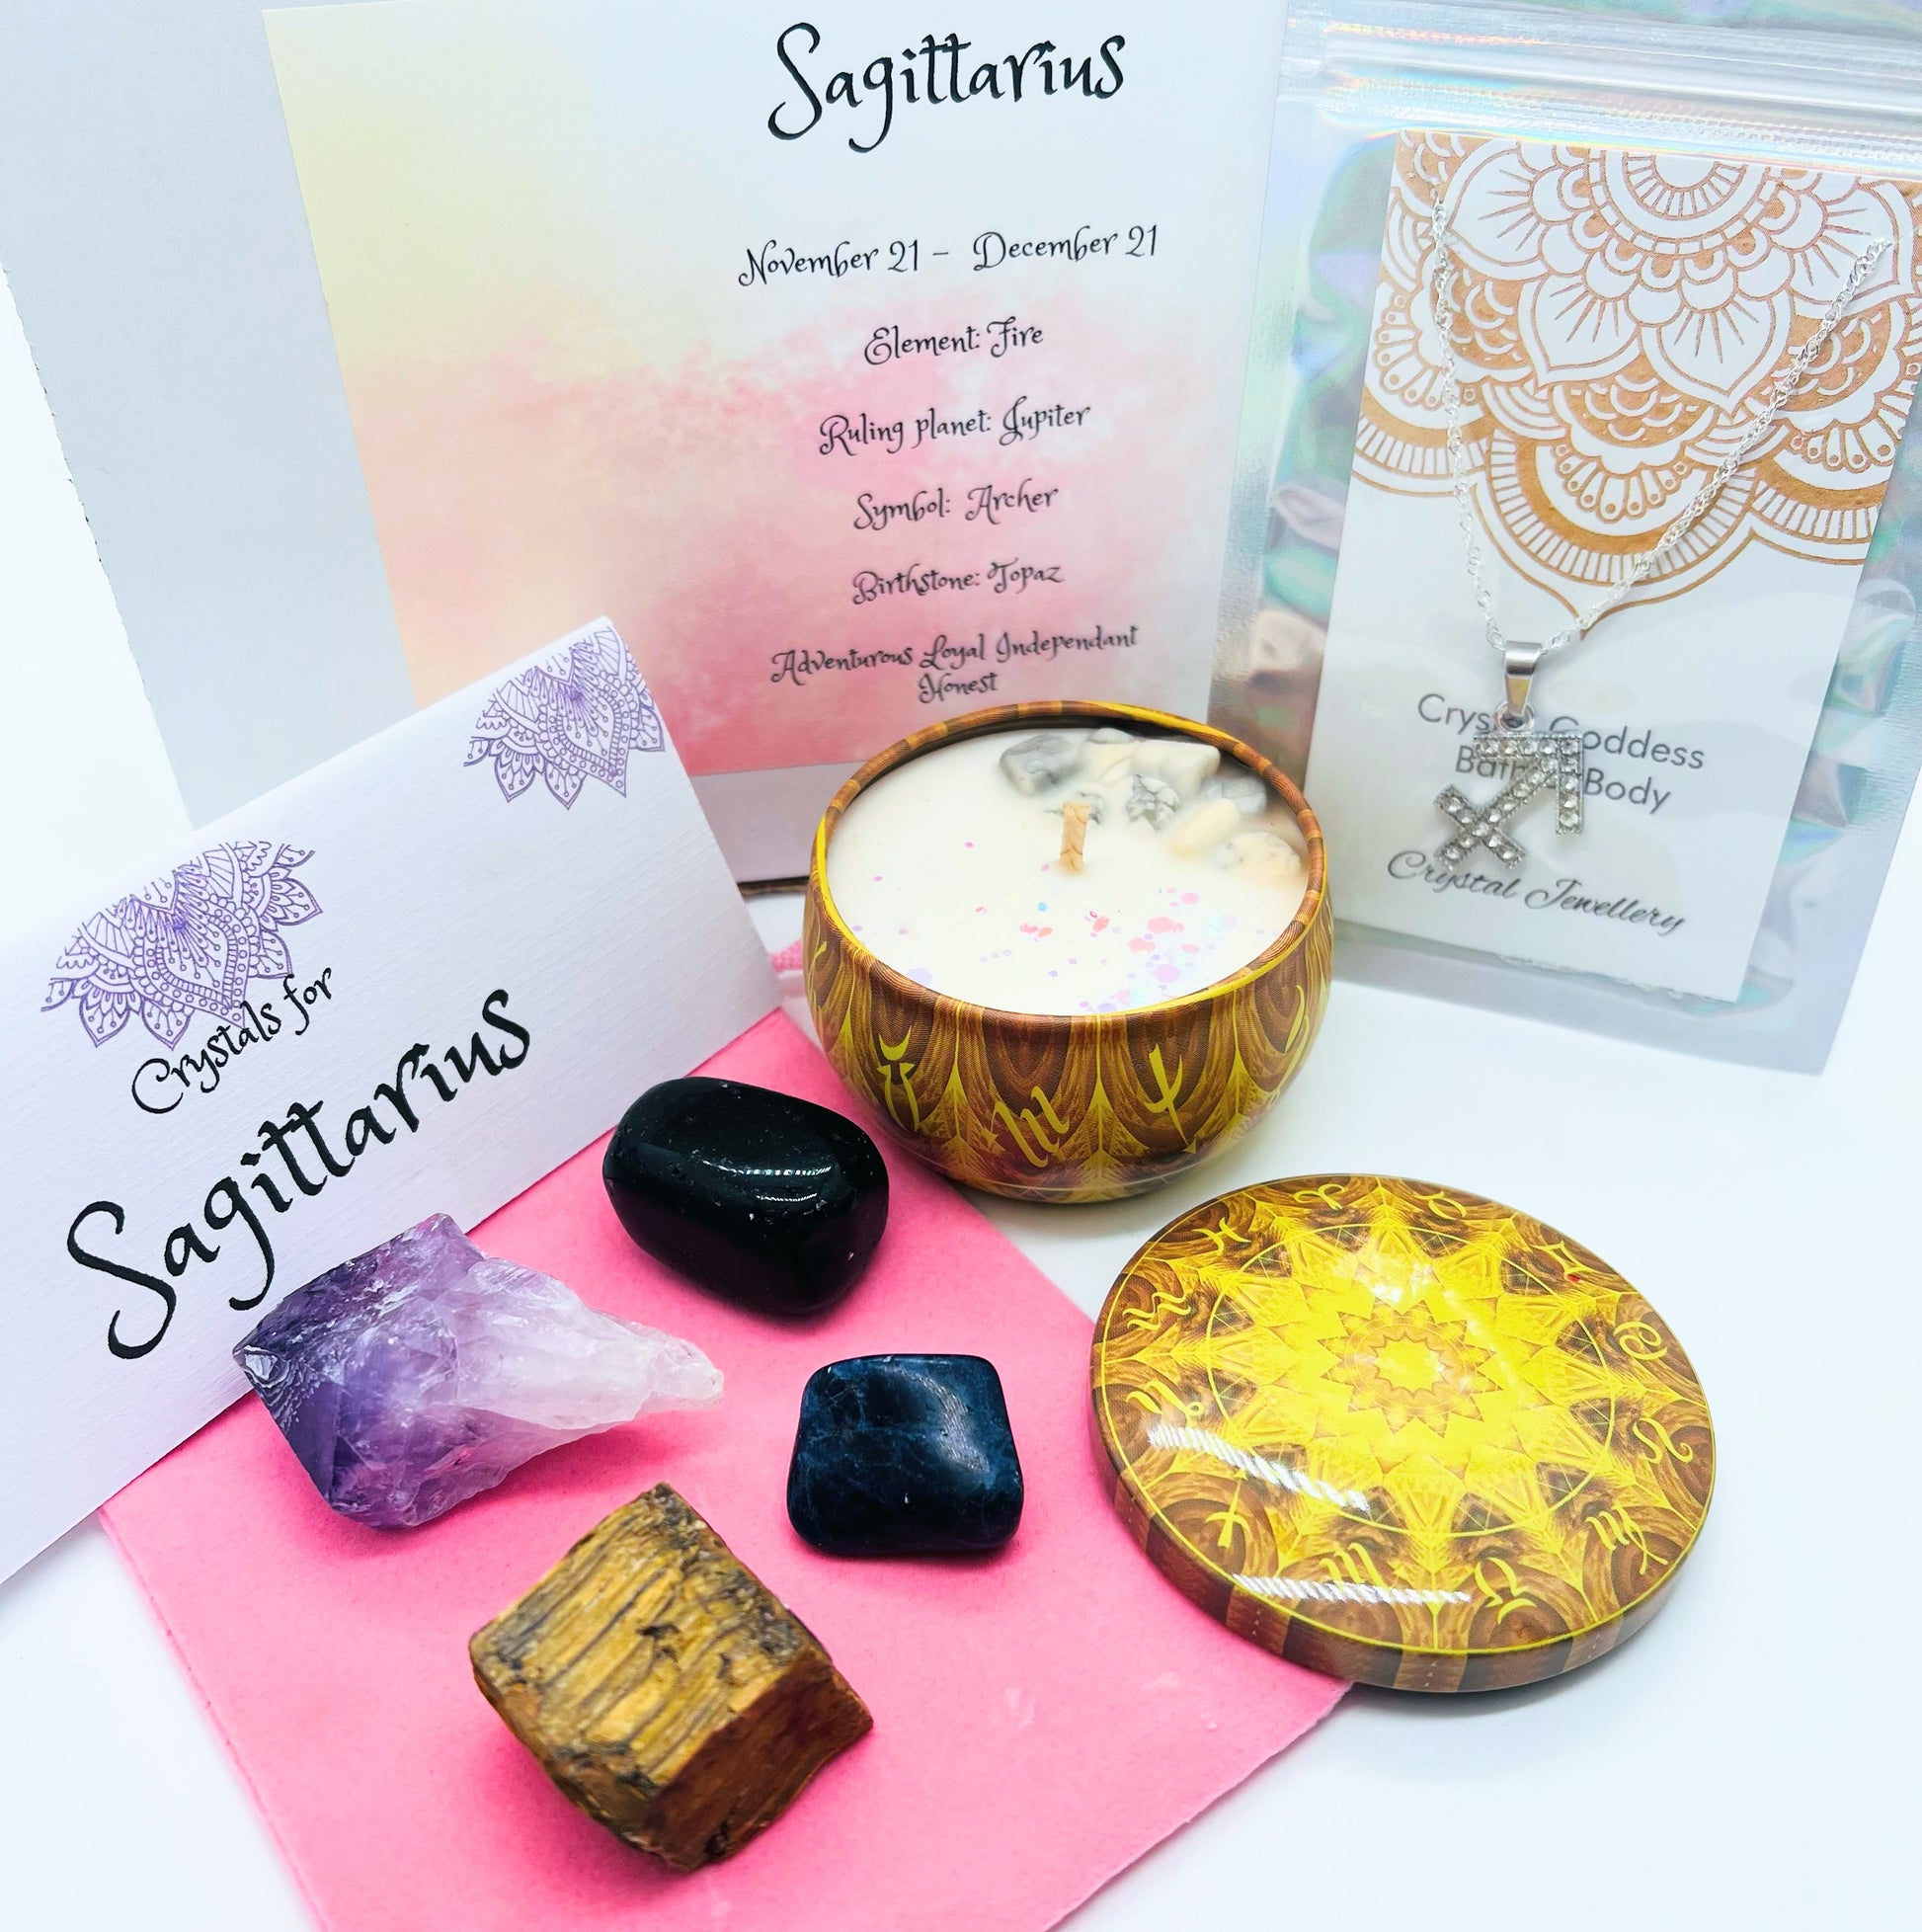 Sagittarius Zodiac gift box showing crystals for this sign and pendant necklace and crystal set.